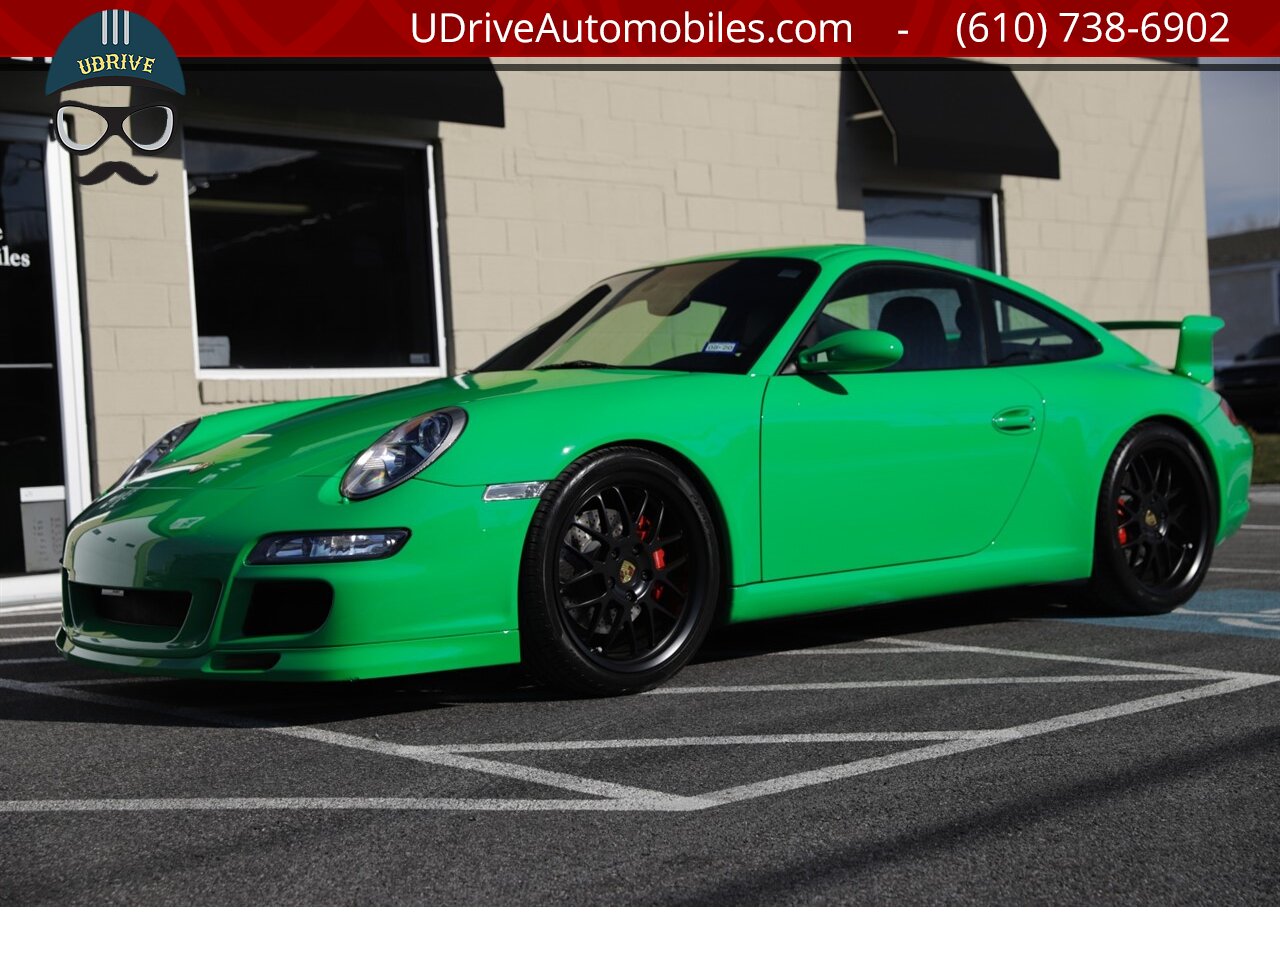 2008 Porsche 911 S 997 6Sp PTS RS Green AeroKit 1of a Kind  $118k MSRP Champion F77 Pkg RG5 Whls - Photo 11 - West Chester, PA 19382